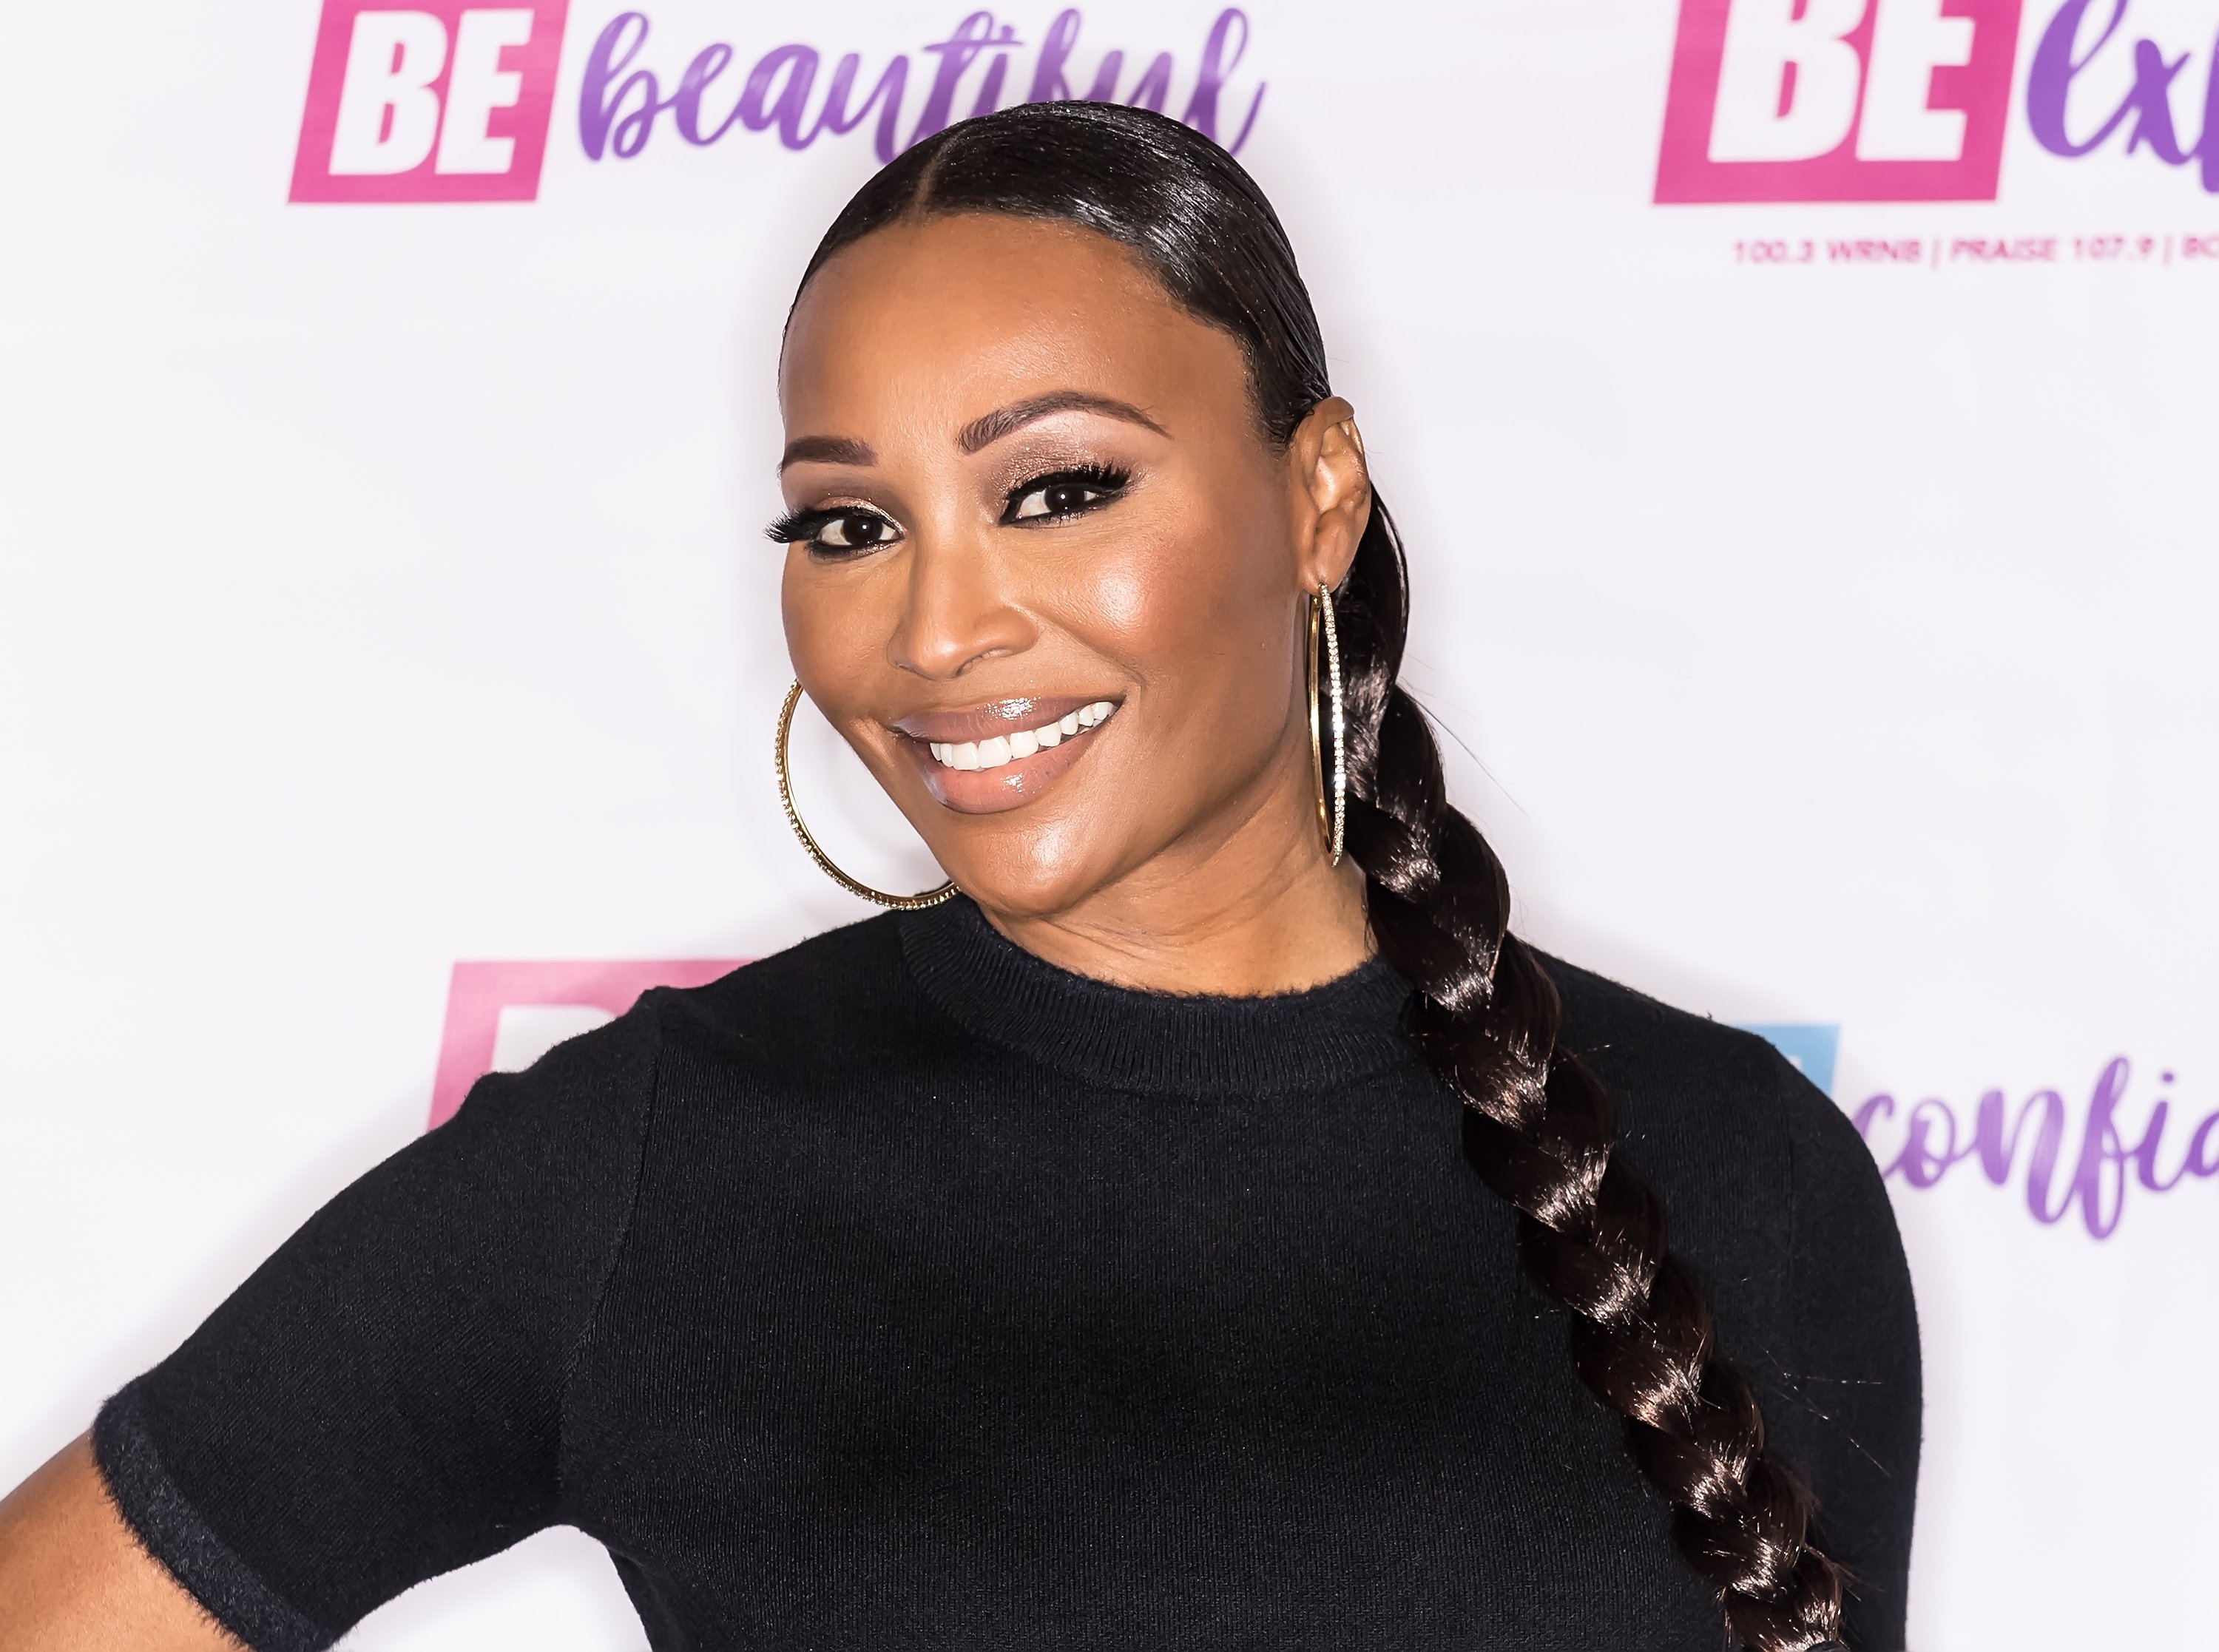 Cynthia Bailey at the Be Expo in March 2018. | Photo: Getty Images